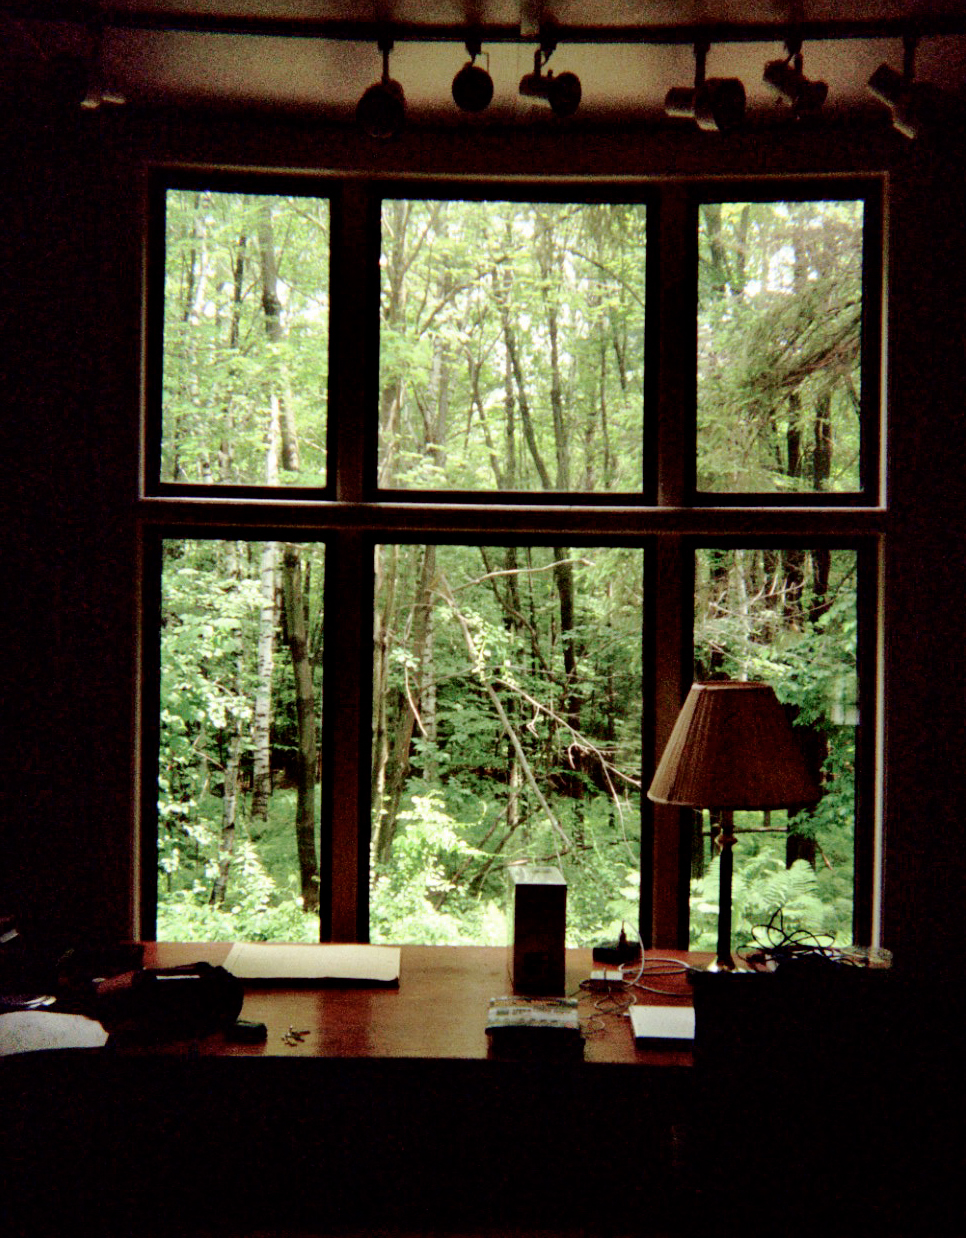 The view of the trees and foliage from the window of the cabin at The MacDowell Colony